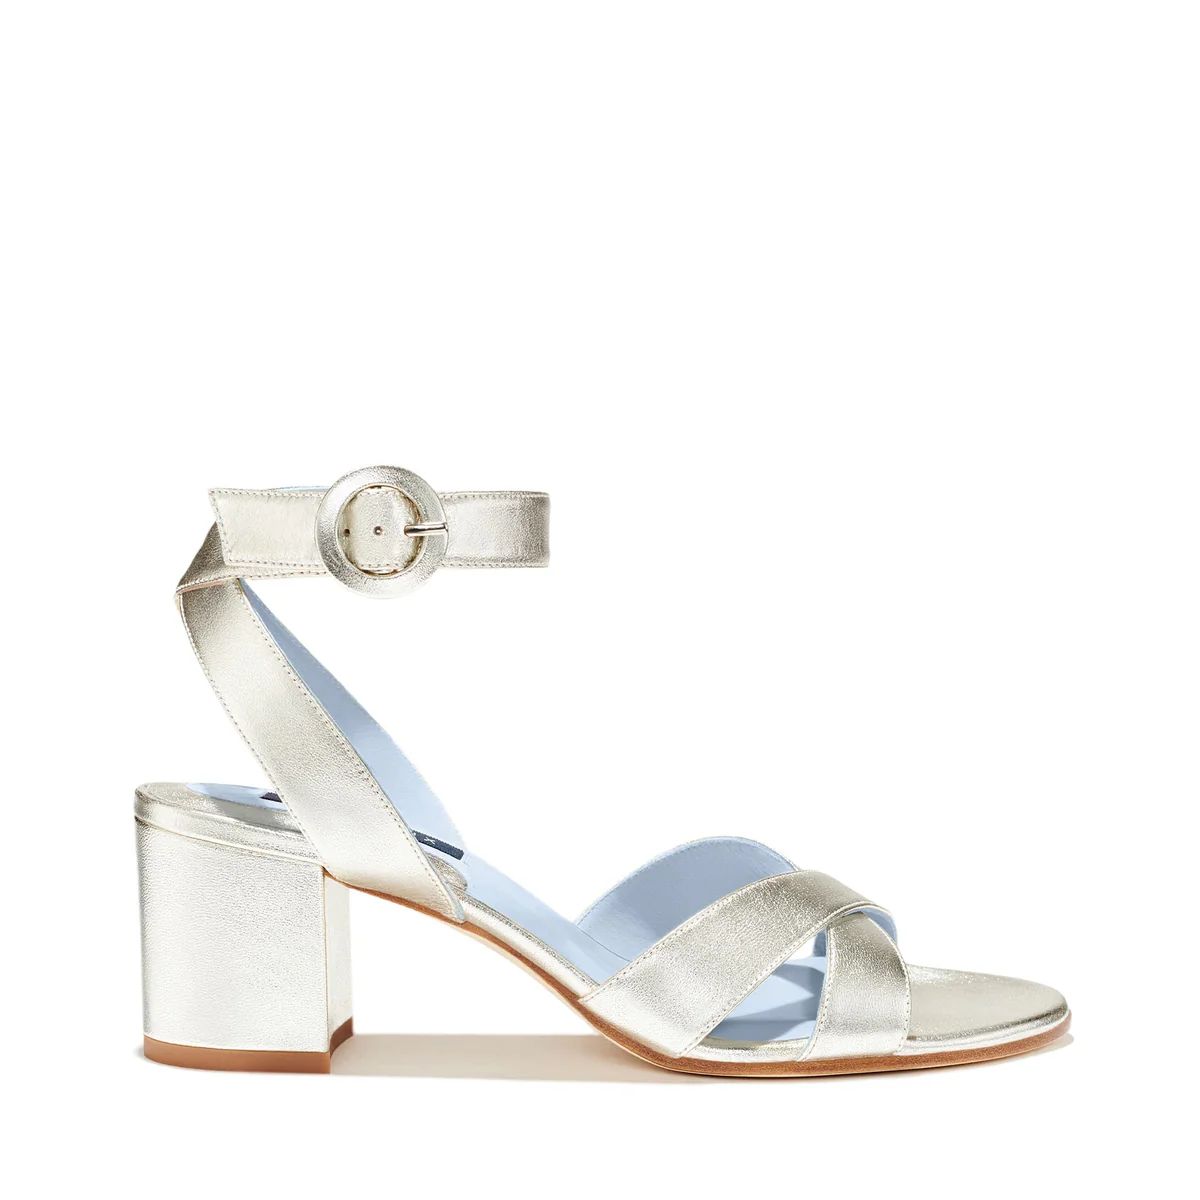 The City Sandal in Metallic | Over The Moon